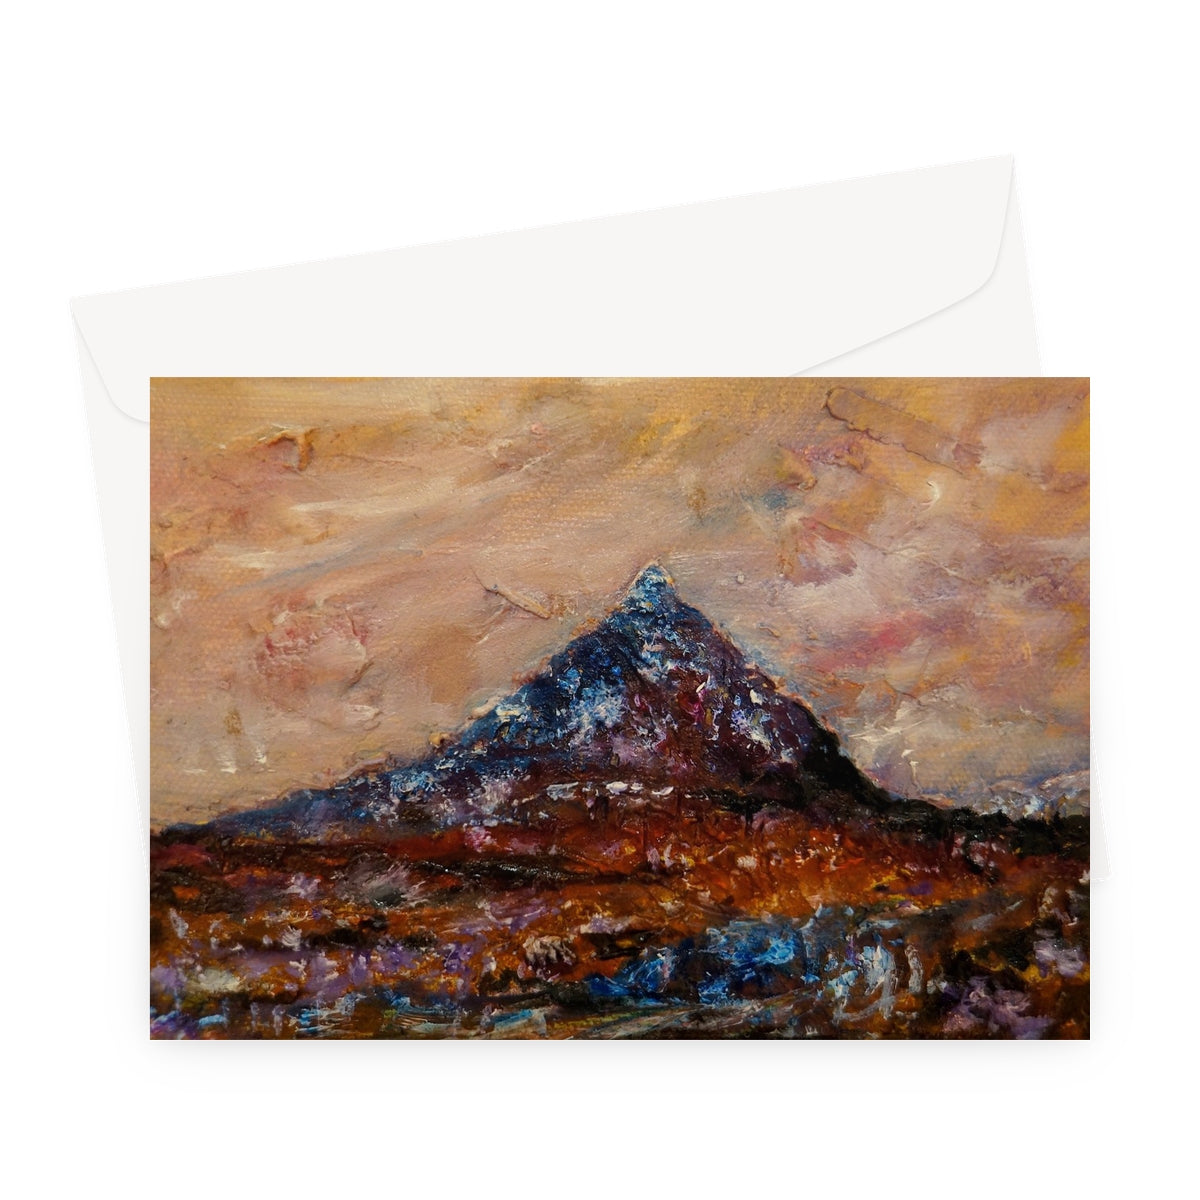 Buachaille Etive Mòr Art Gifts Greeting Card-Greetings Cards-Glencoe Art Gallery-A5 Landscape-10 Cards-Paintings, Prints, Homeware, Art Gifts From Scotland By Scottish Artist Kevin Hunter